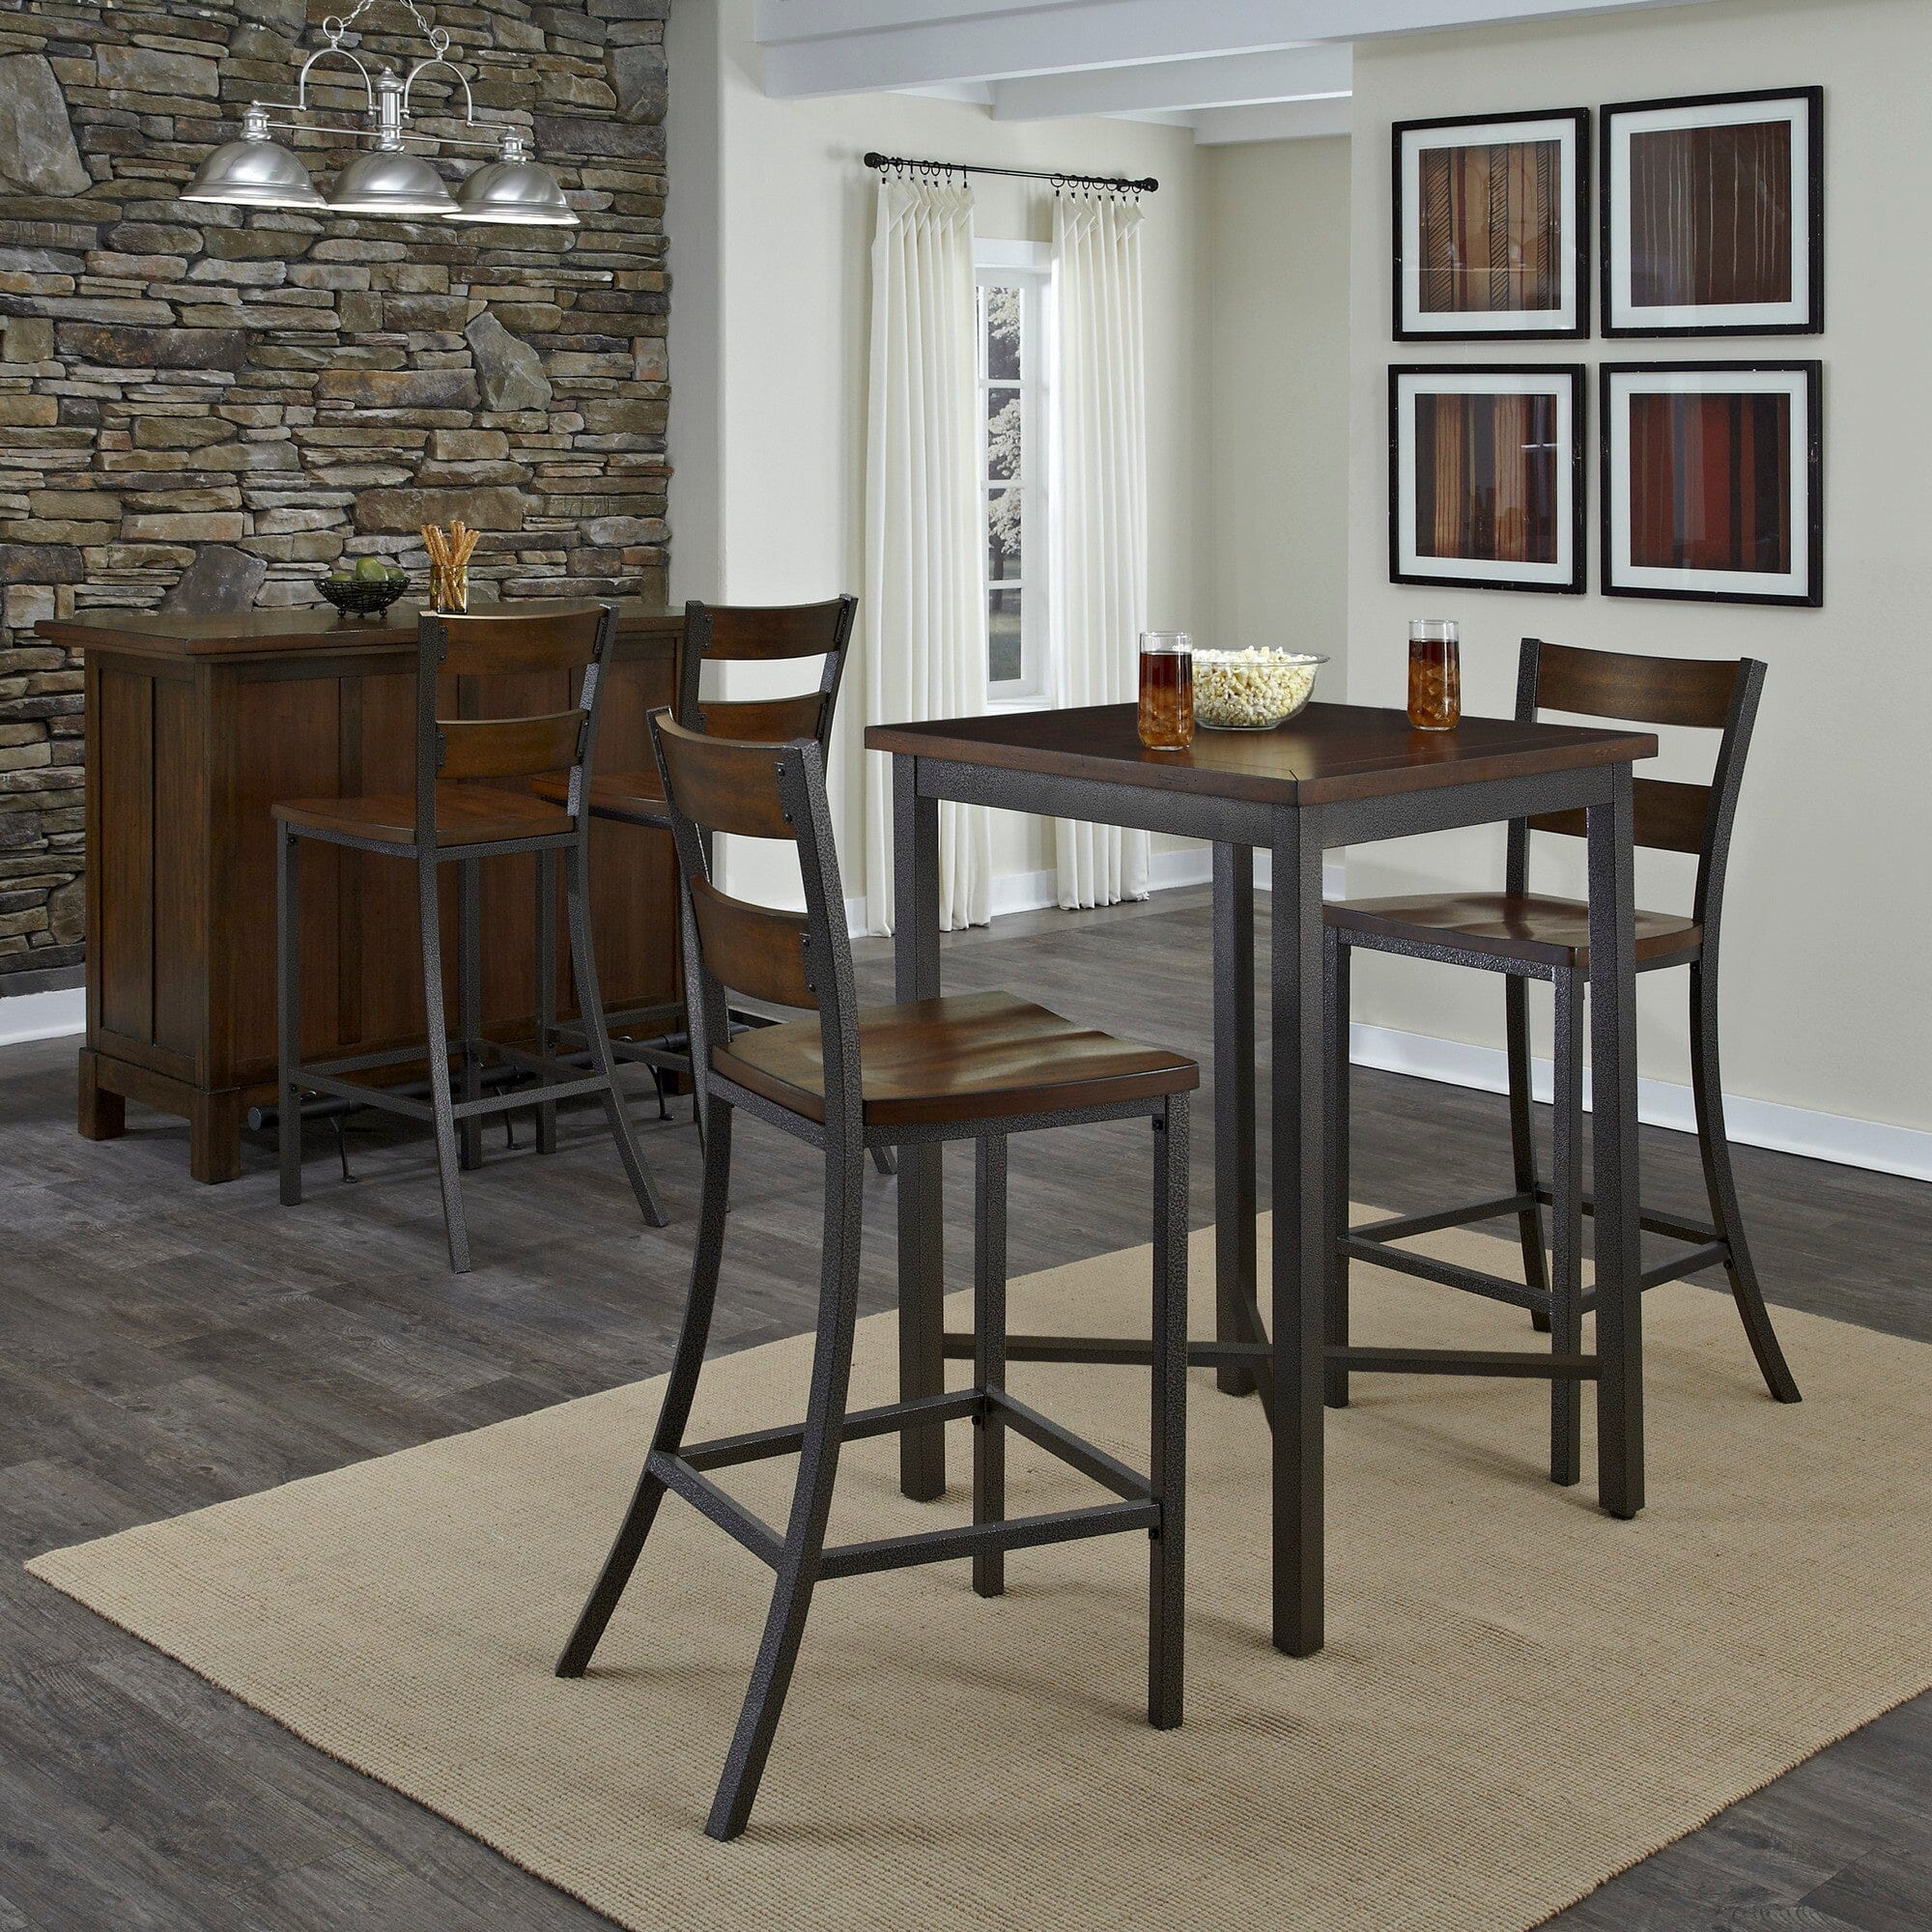 Cabin 3 Piece Bistro Set By Cabin Creek Dining Table & Chairs Cabin Creek